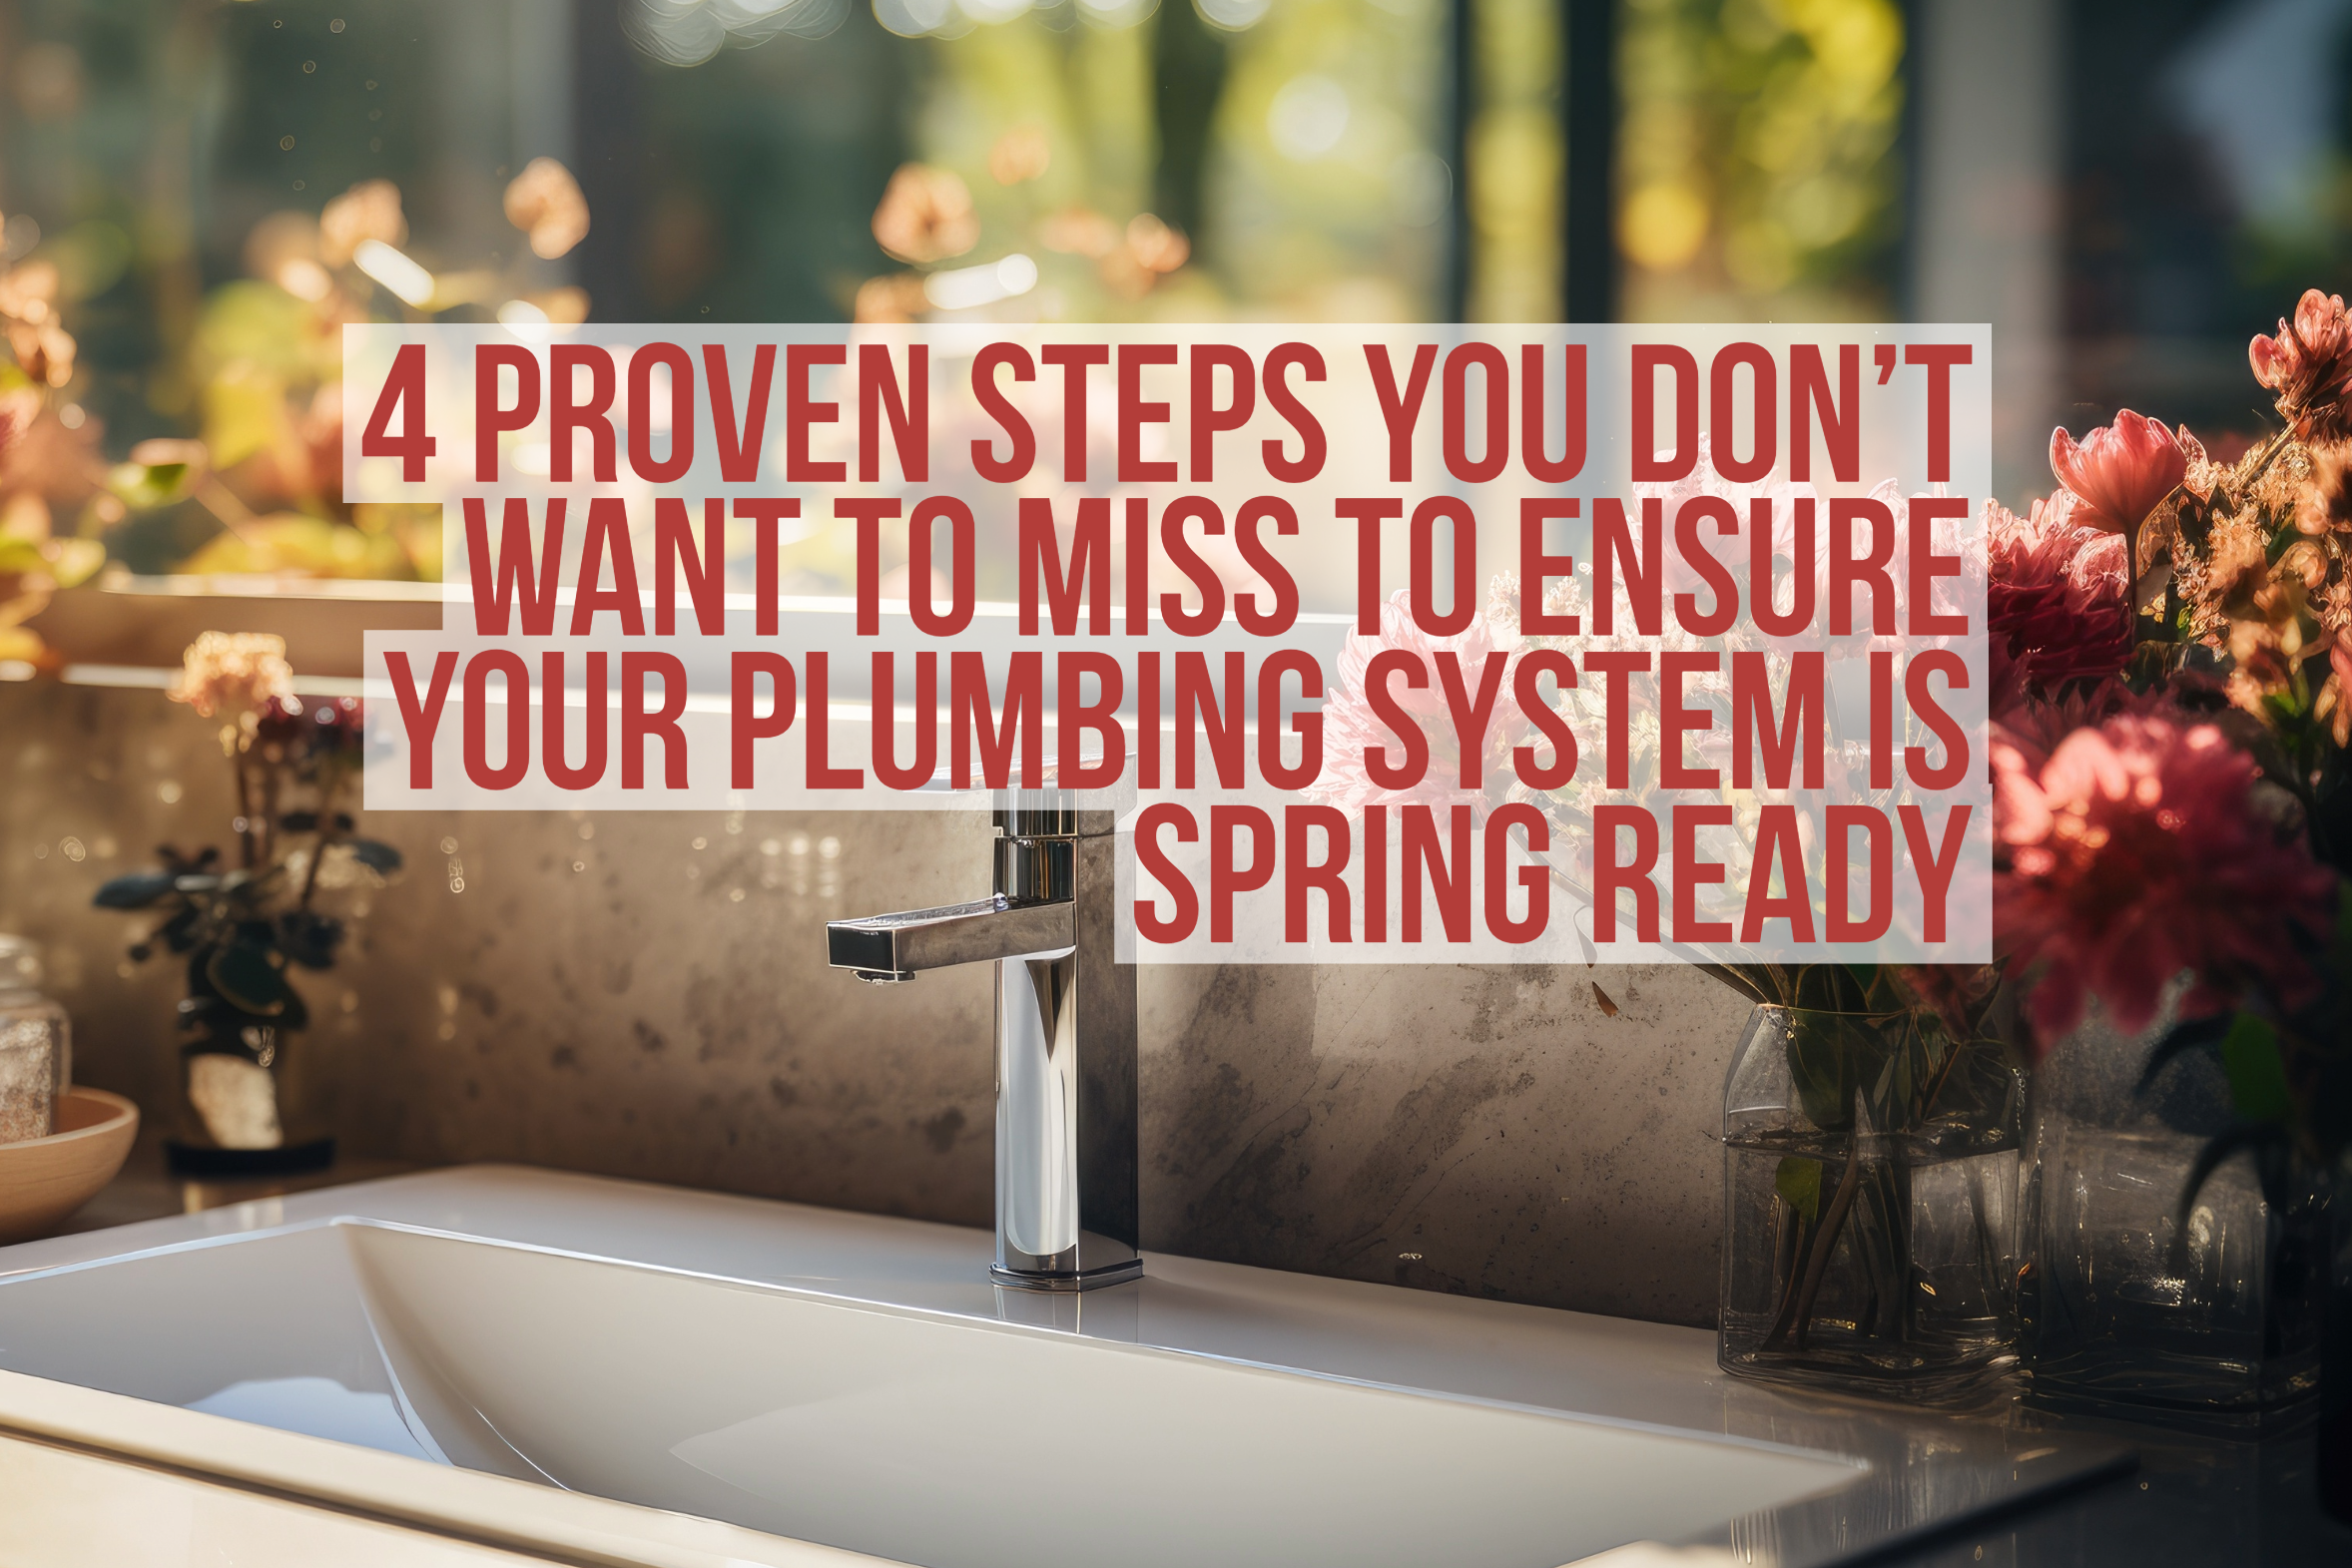 Steps you should take to get your plumbing system spring ready!